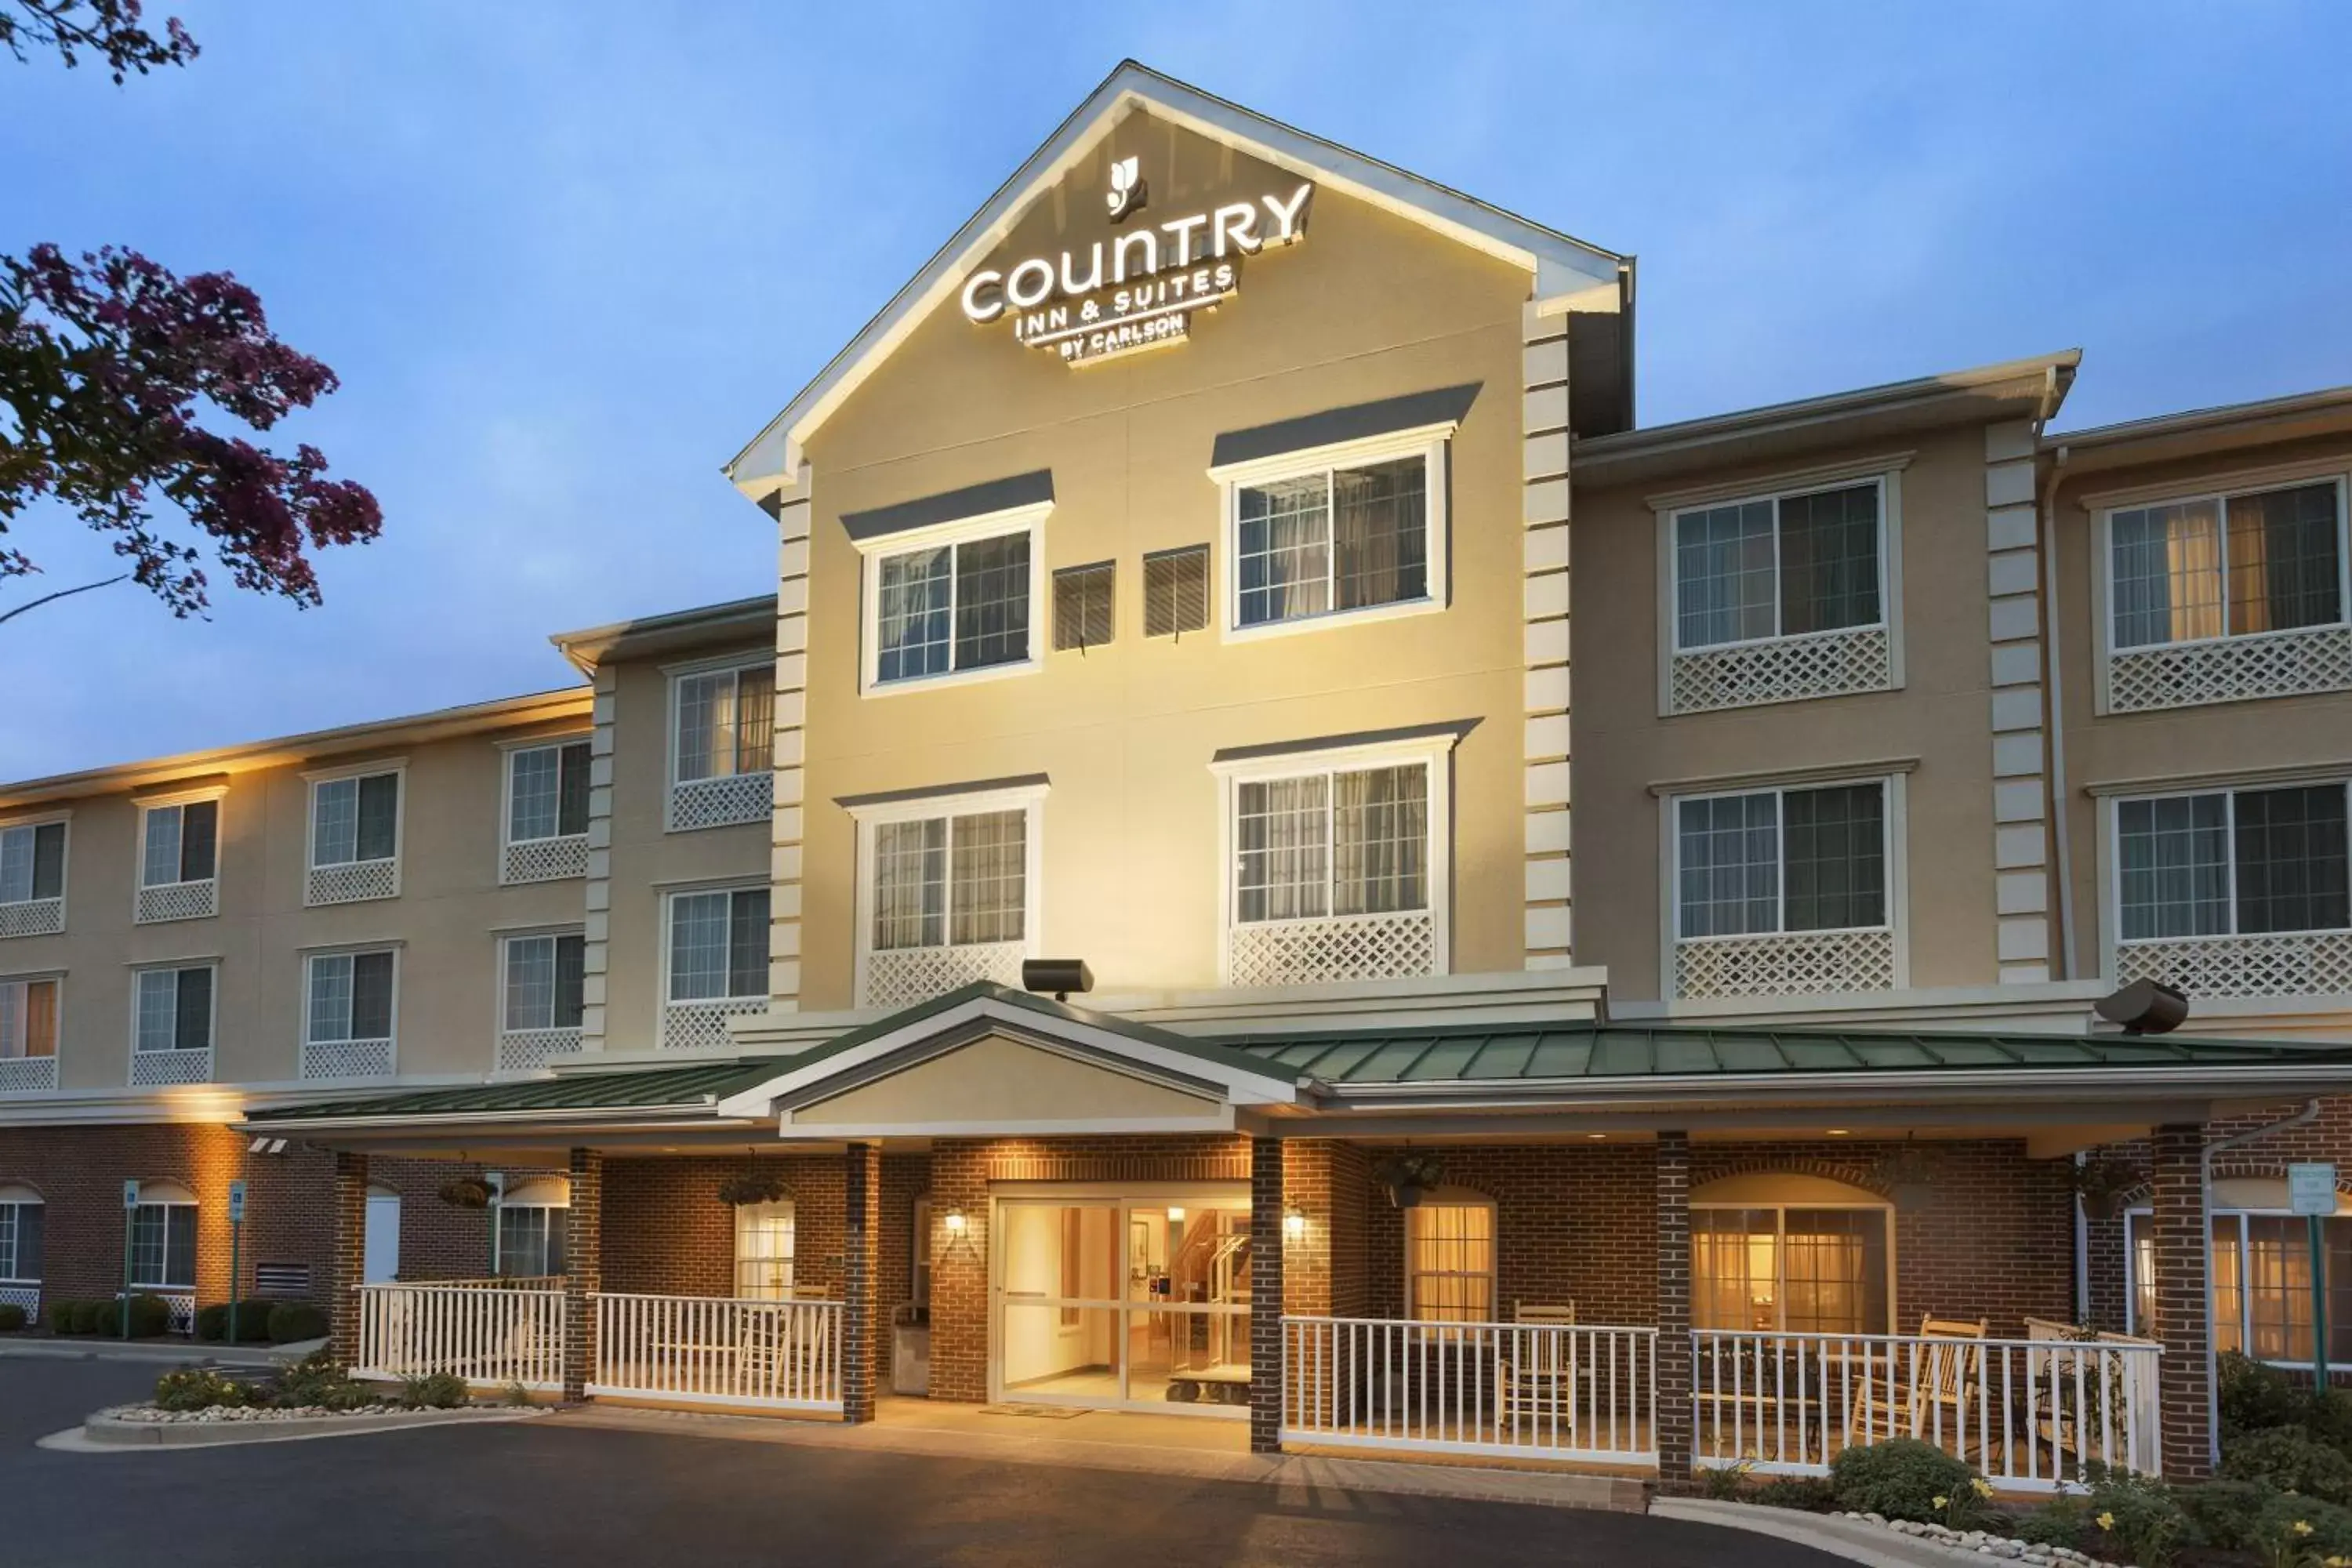 Property Building in Country Inn & Suites by Radisson, Bel Air/Aberdeen, MD